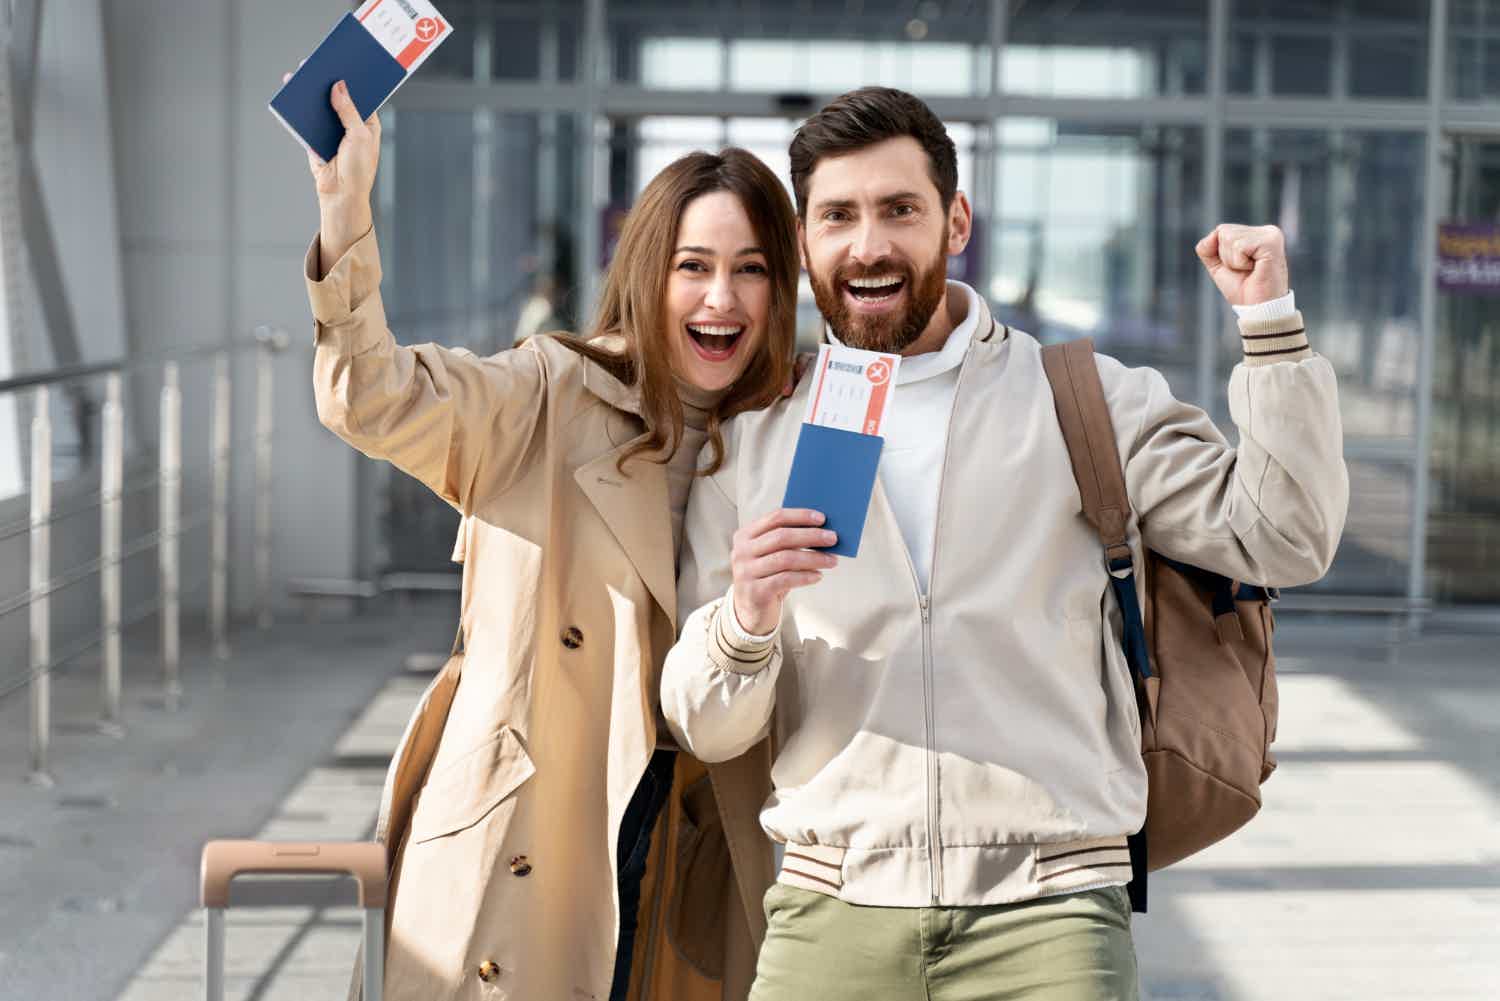 buy your flight tickets at the right moment and enjoy the best prices! Source: Freepik.